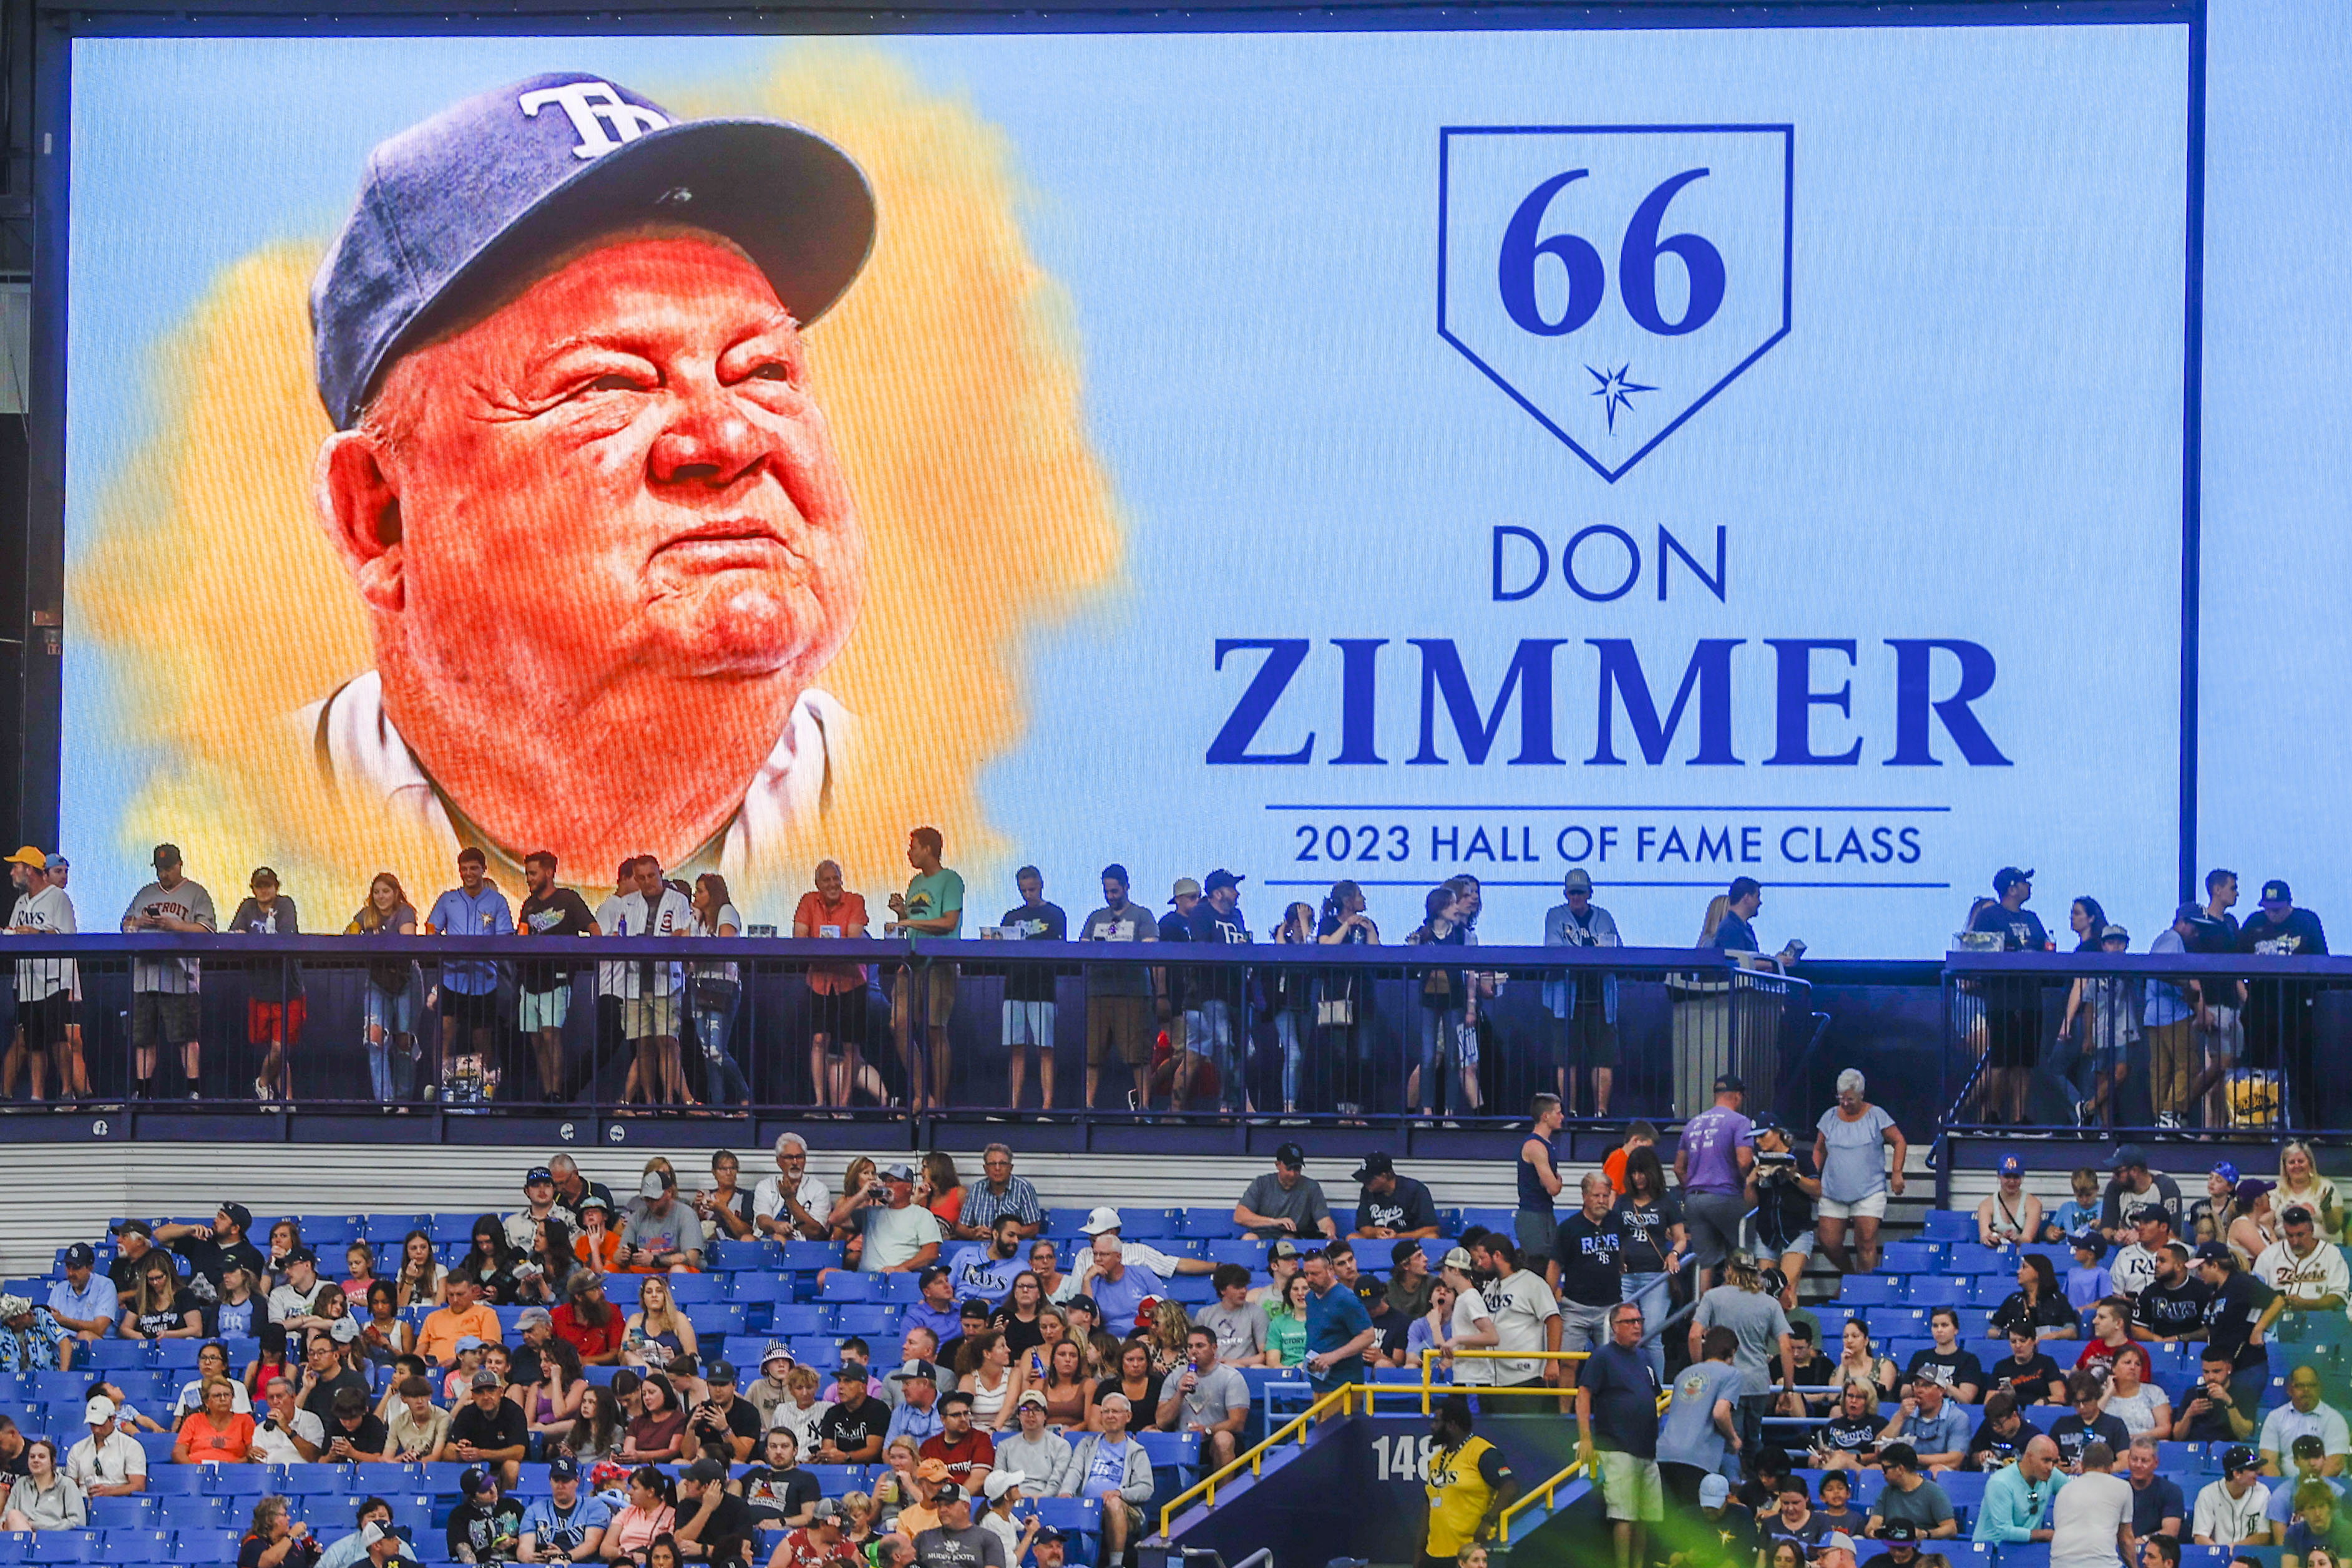 Rays to retire Don Zimmer's uniform